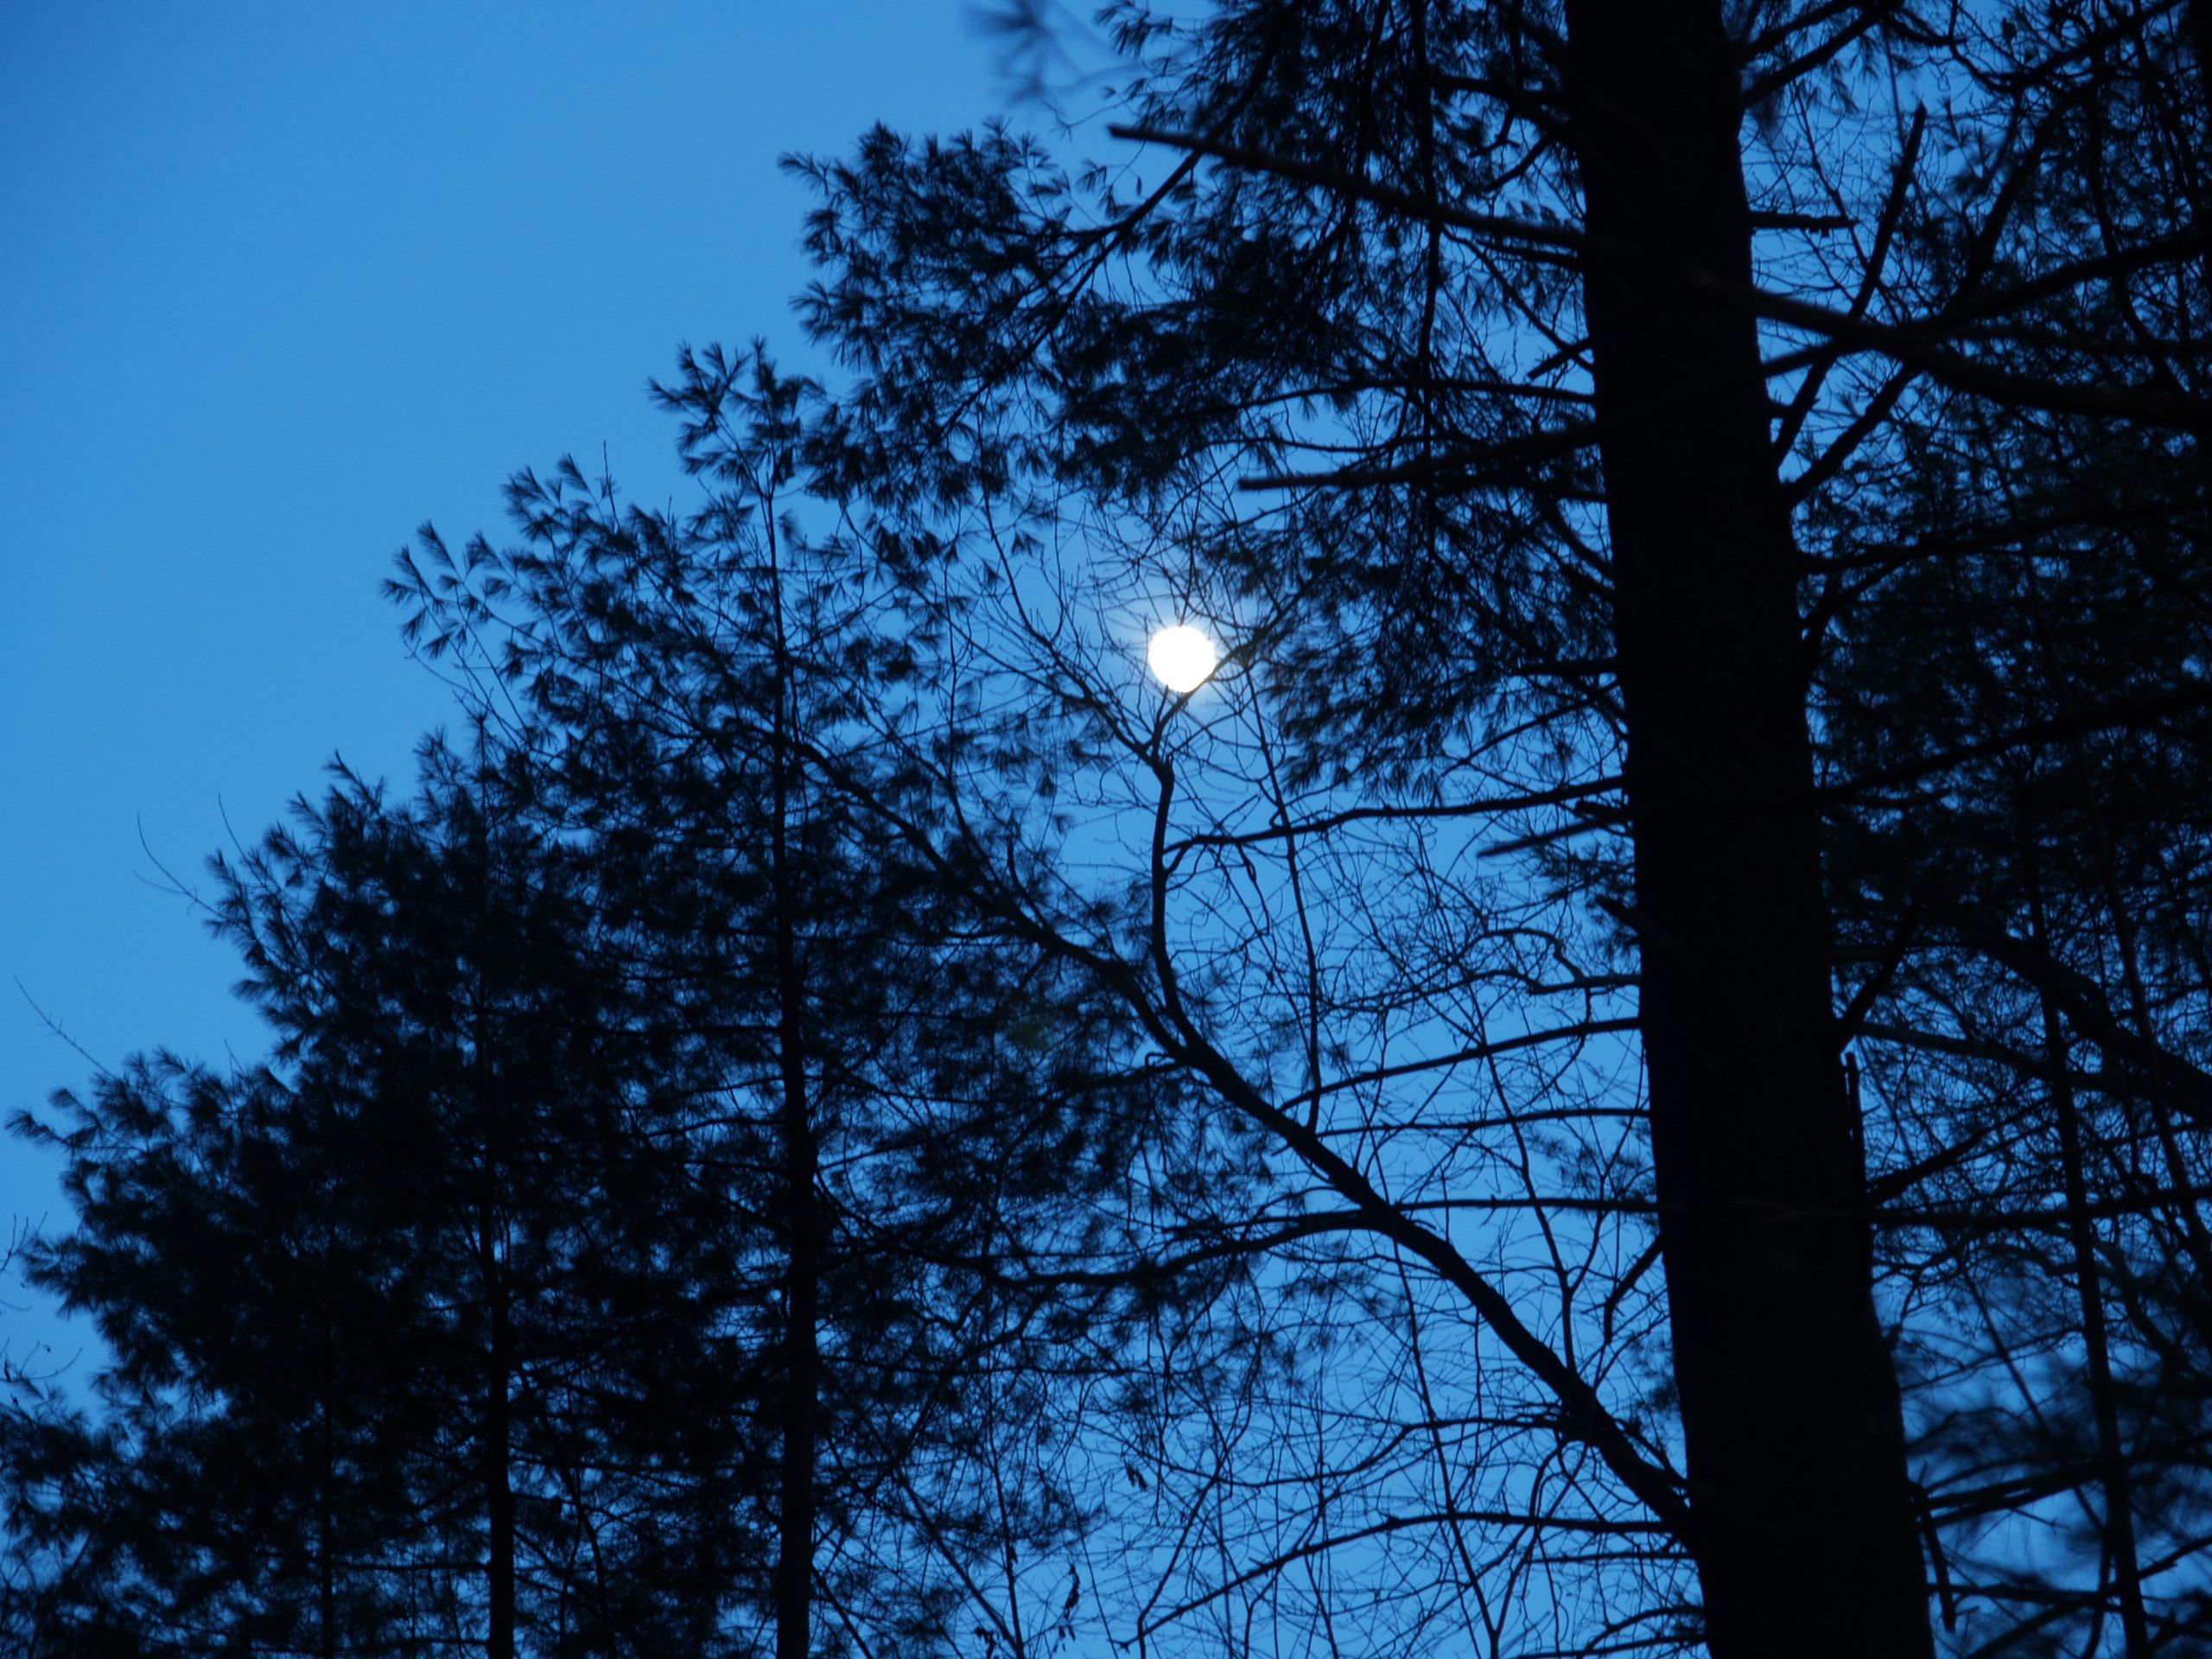 Moon and trees #2